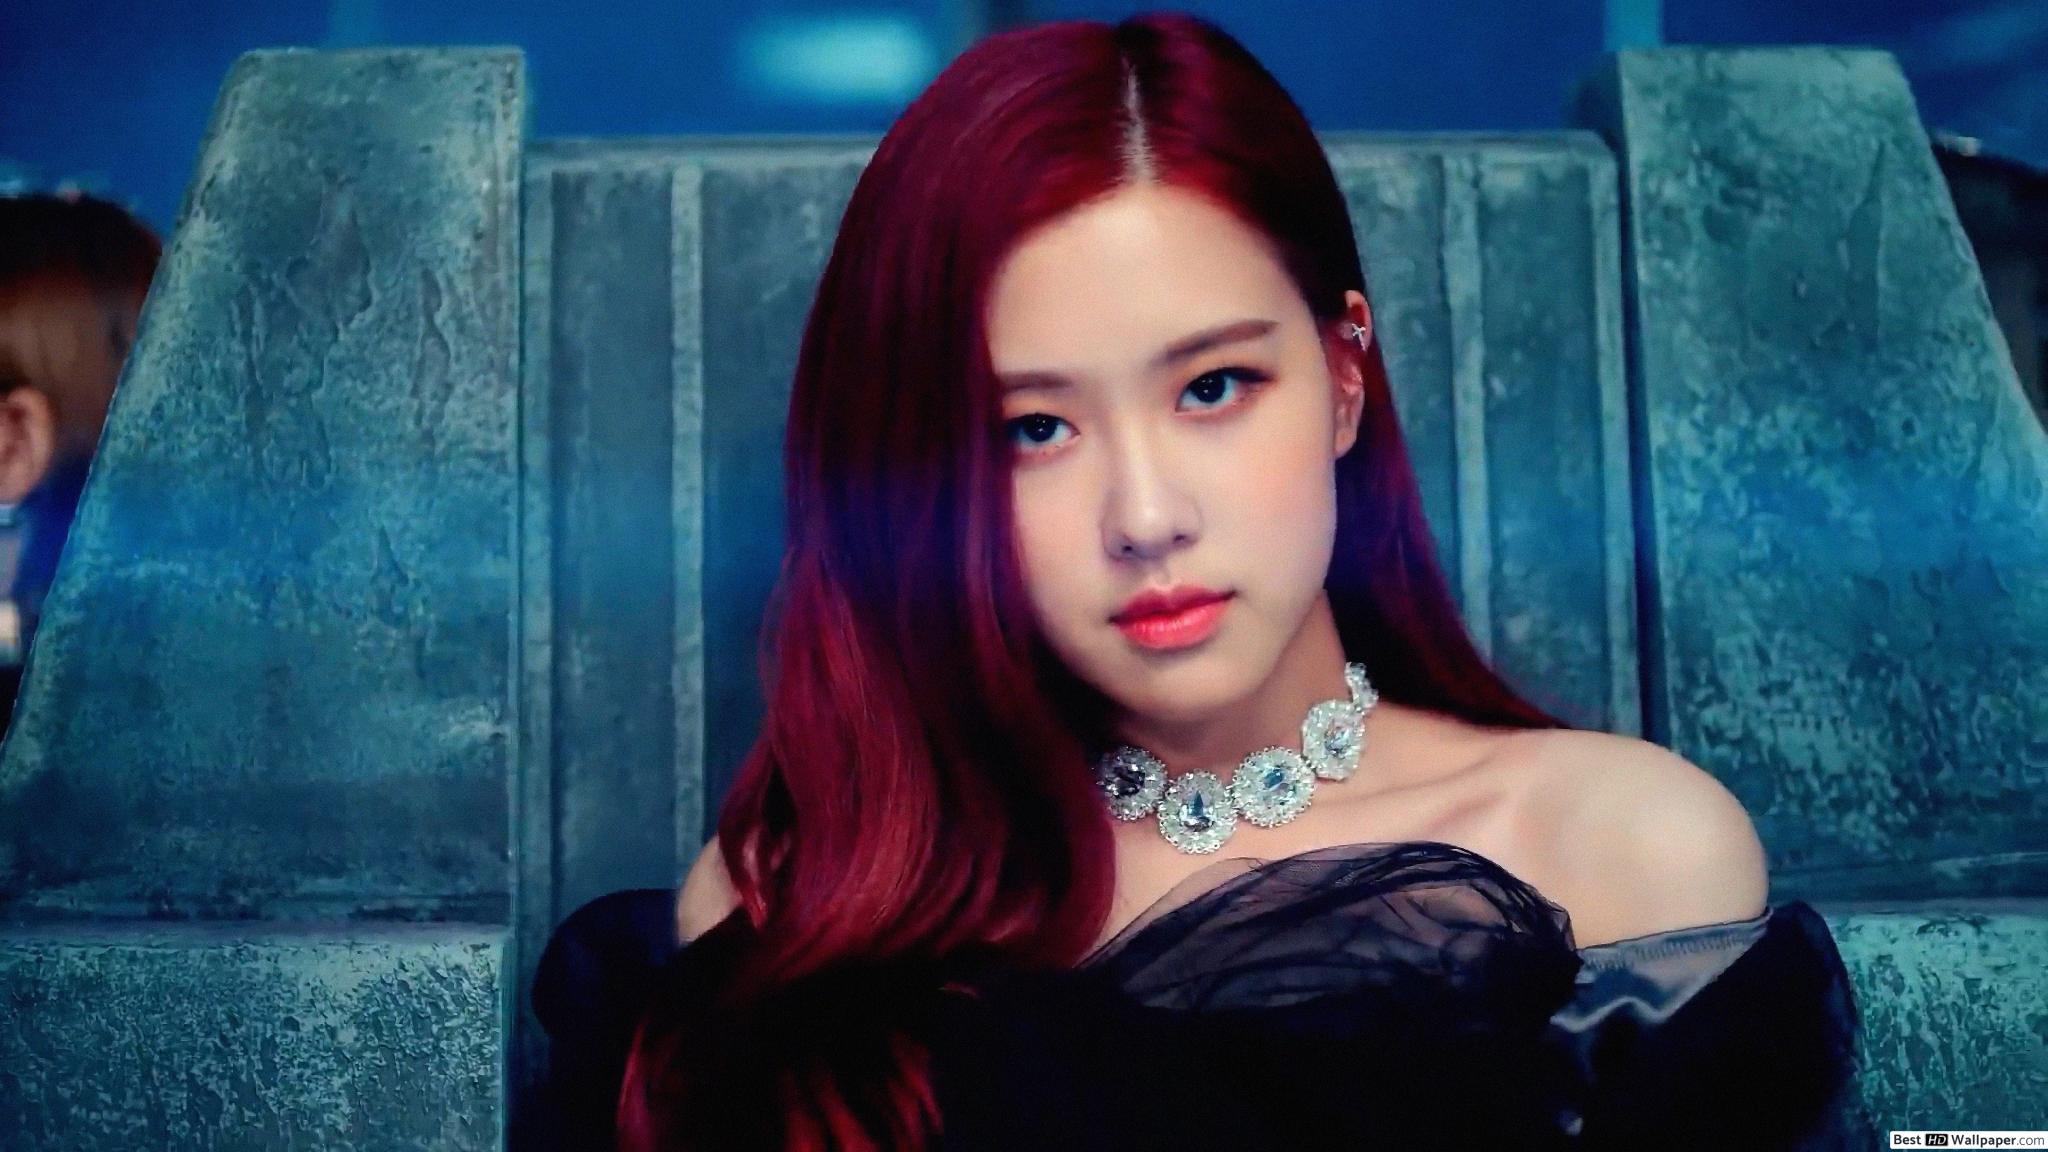 Gorgeous 'Rose' from BlackPink HD wallpaper download